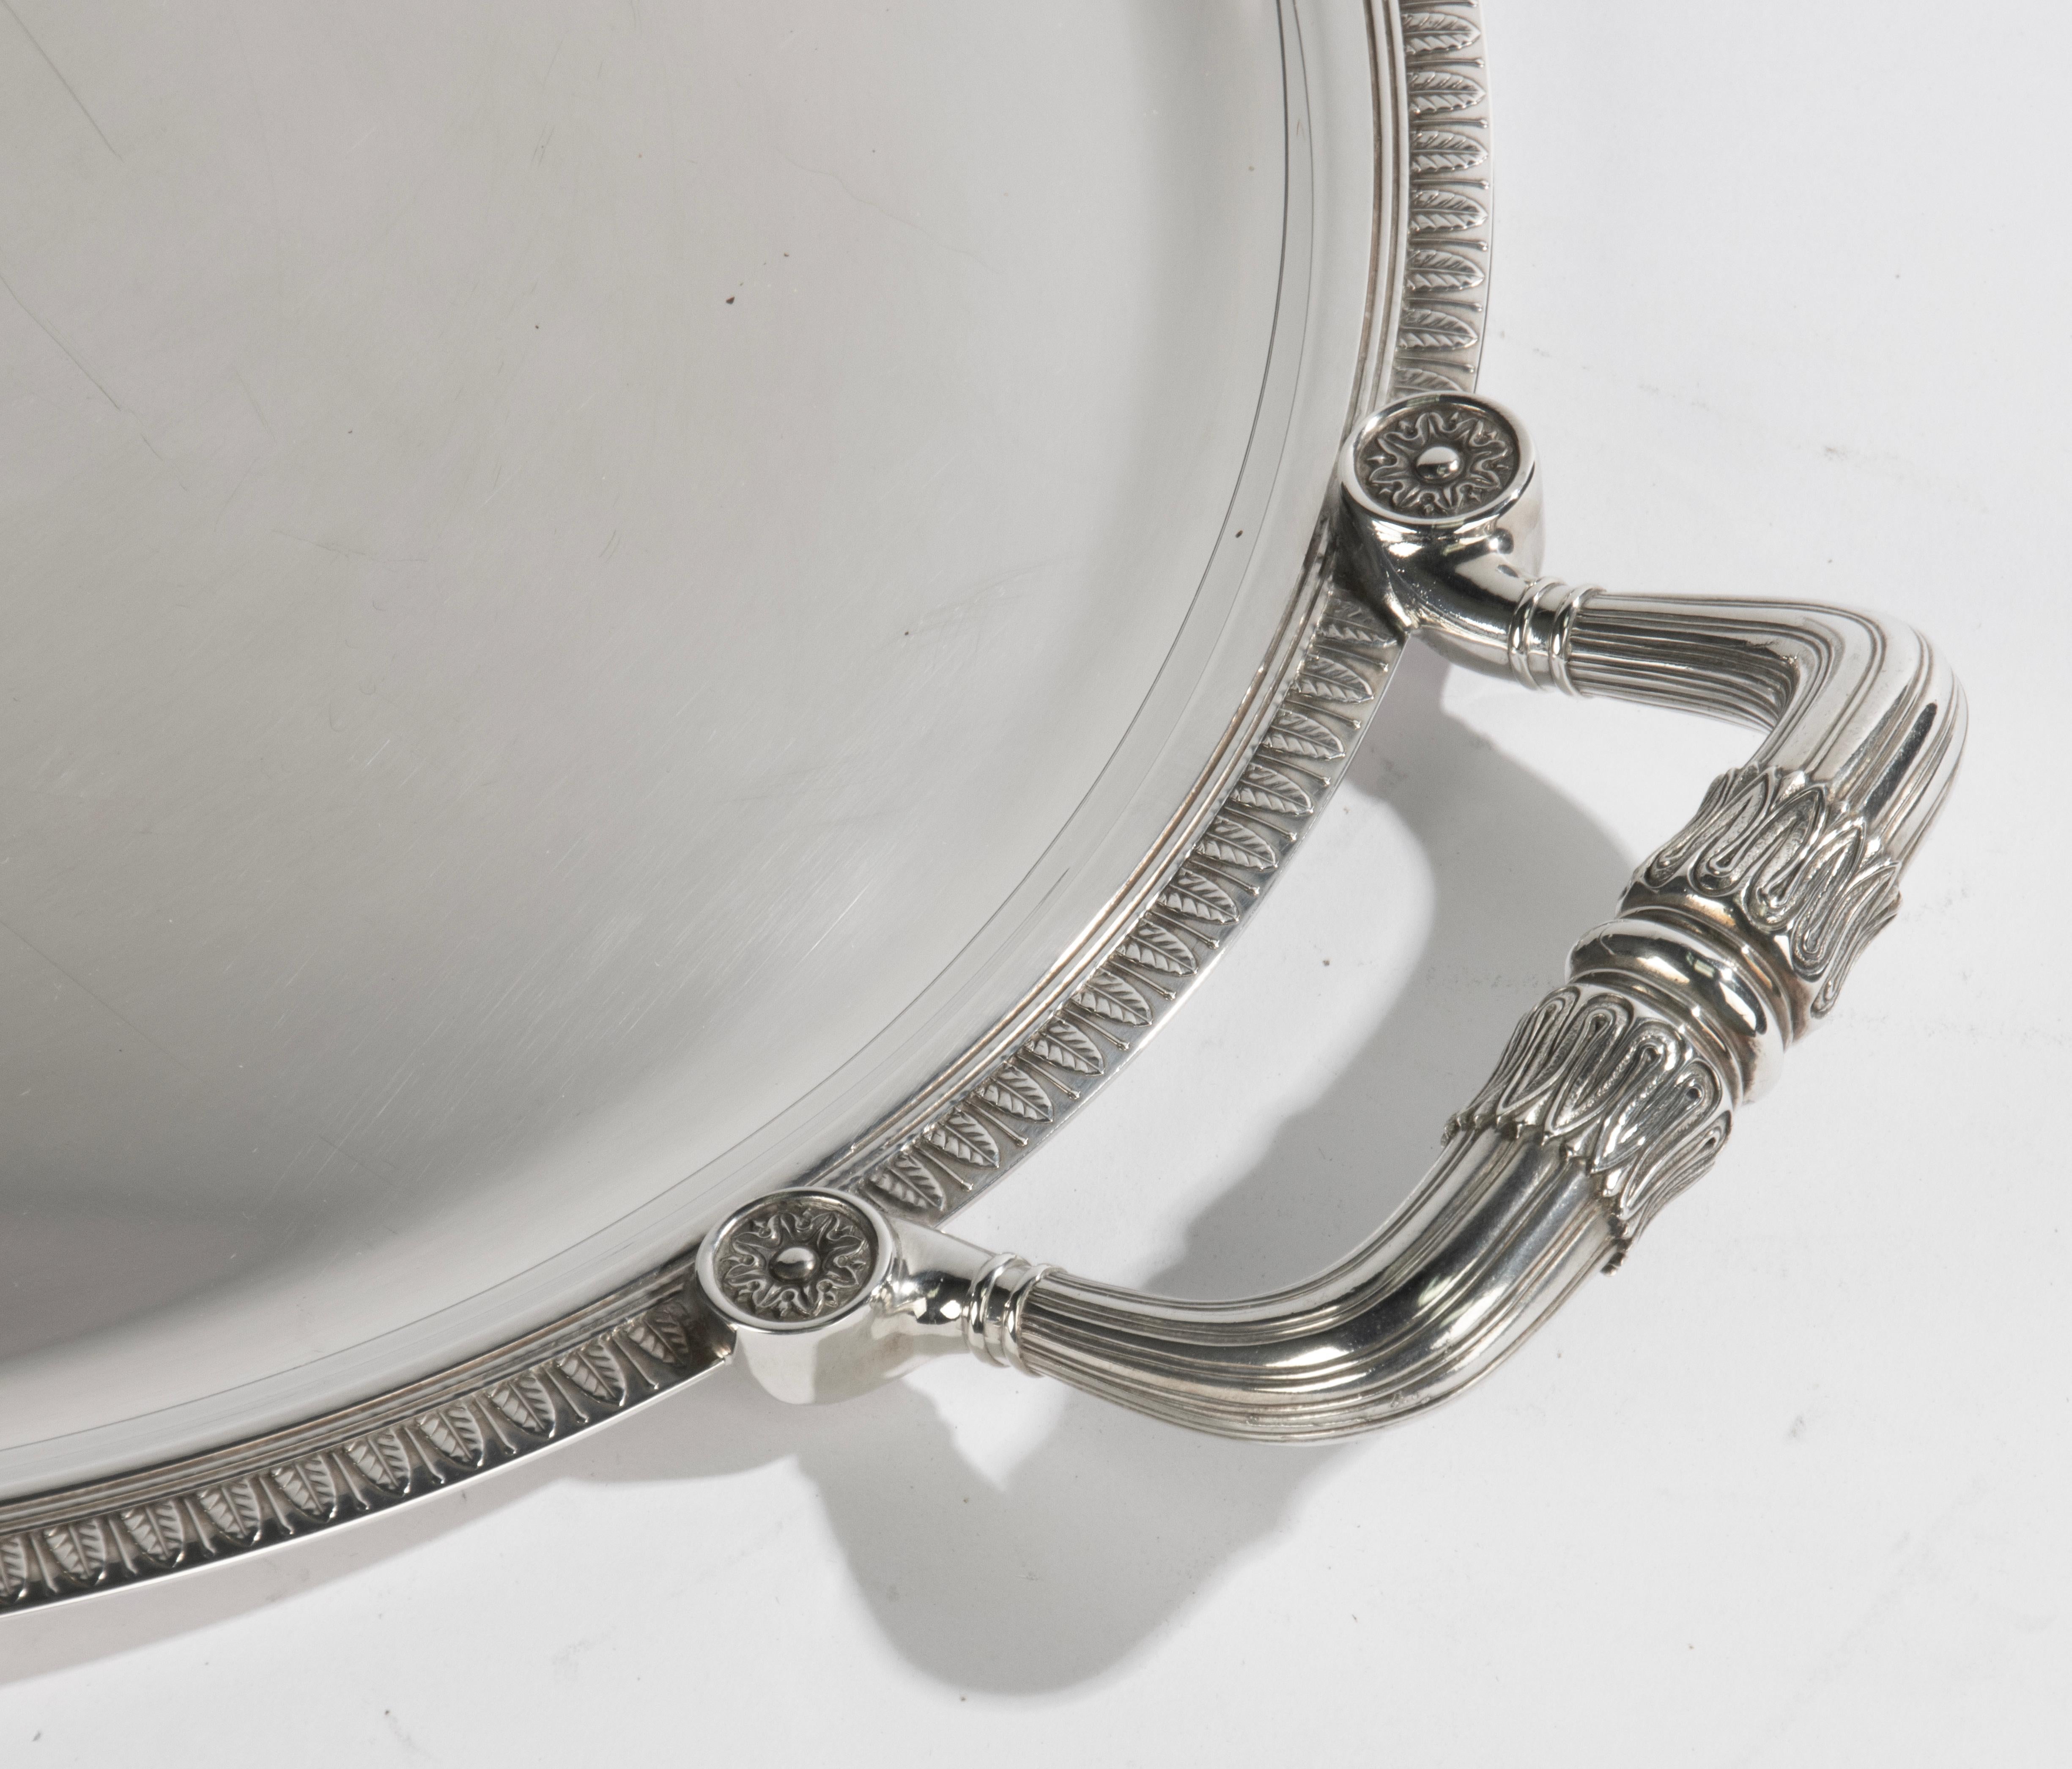 Large Silver Plated Serving Tray - Christofle - Malmaison For Sale 2